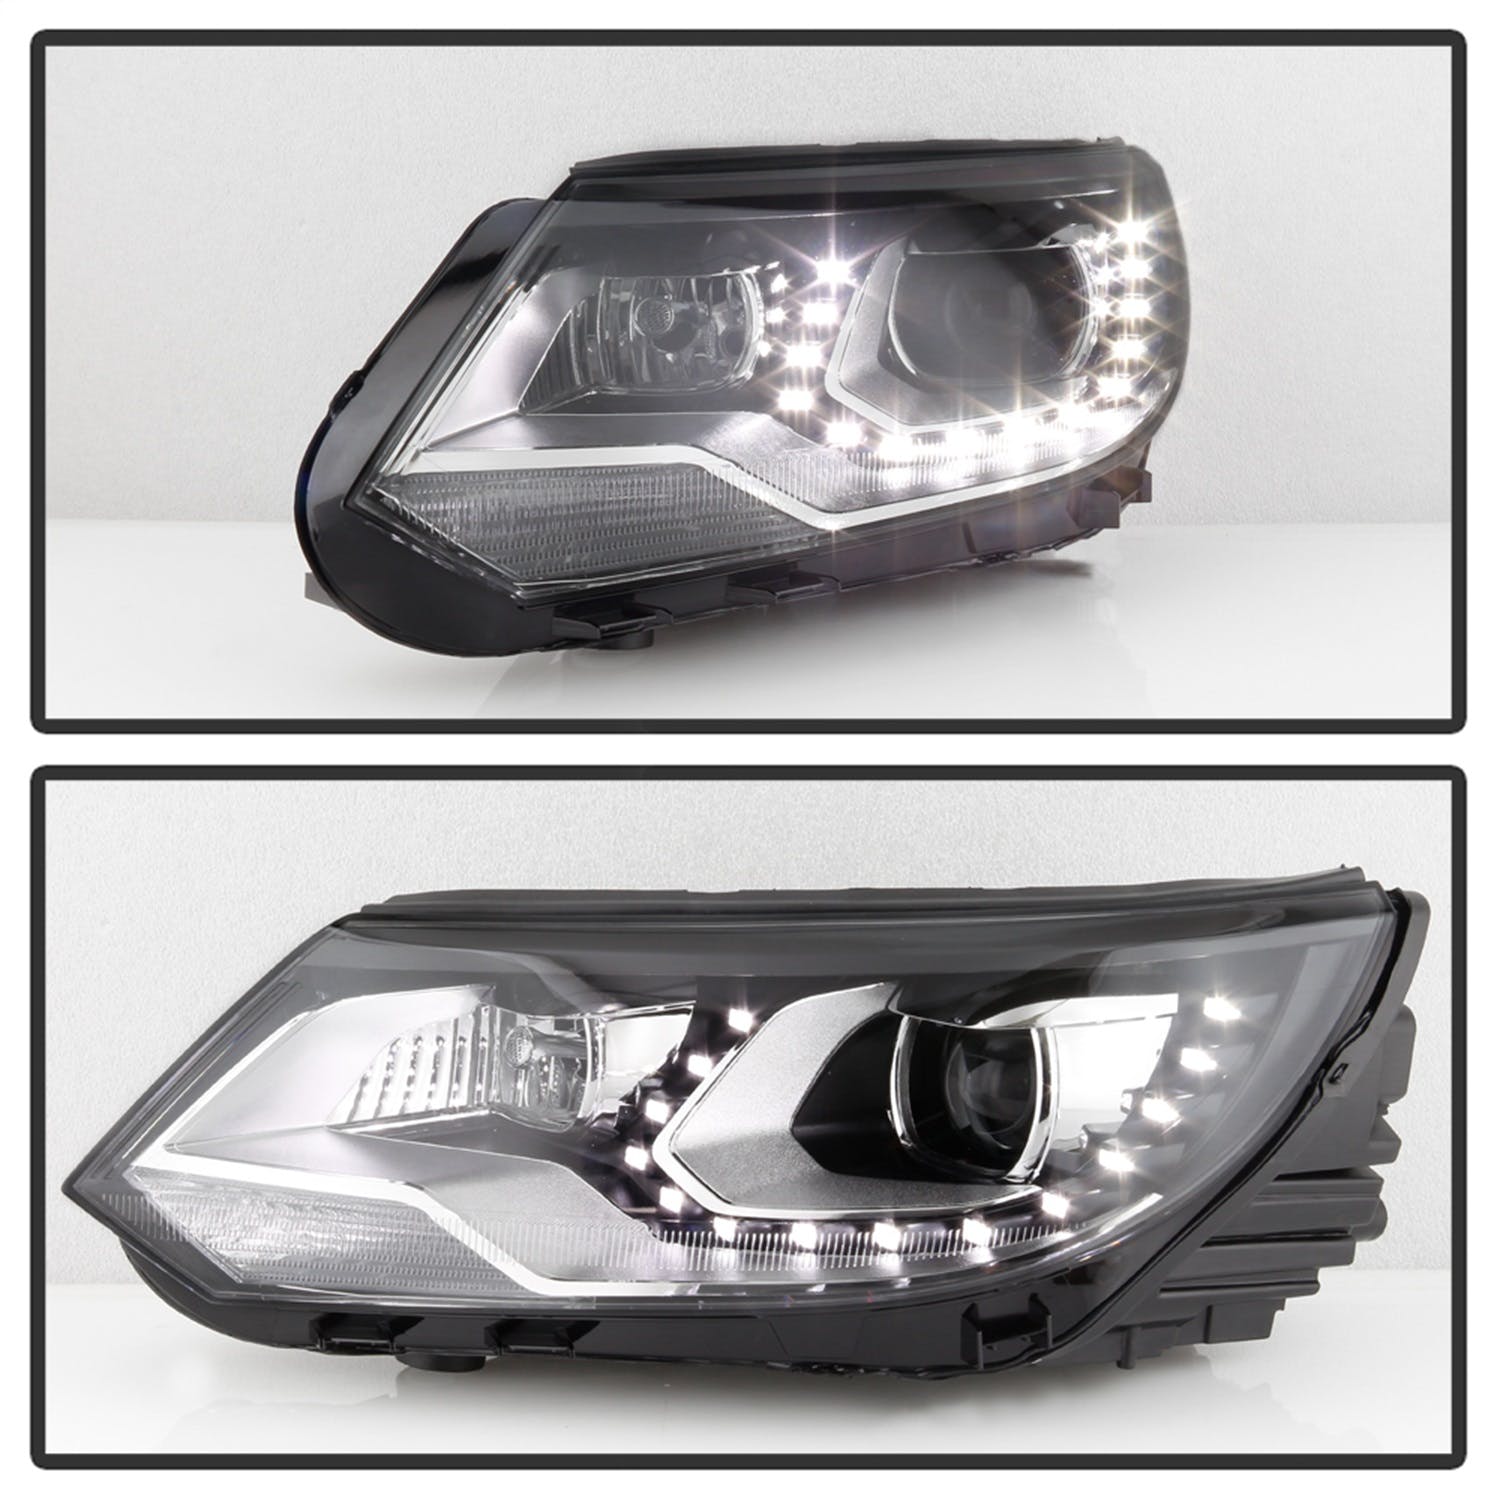 XTUNE POWER 9948527 VW Tiguan 12 17 (Fit OE Halogen Model) LED DRL  Projector Headlights Low Beam H7(Included) ; High Beam H7(Included) ;  Signal